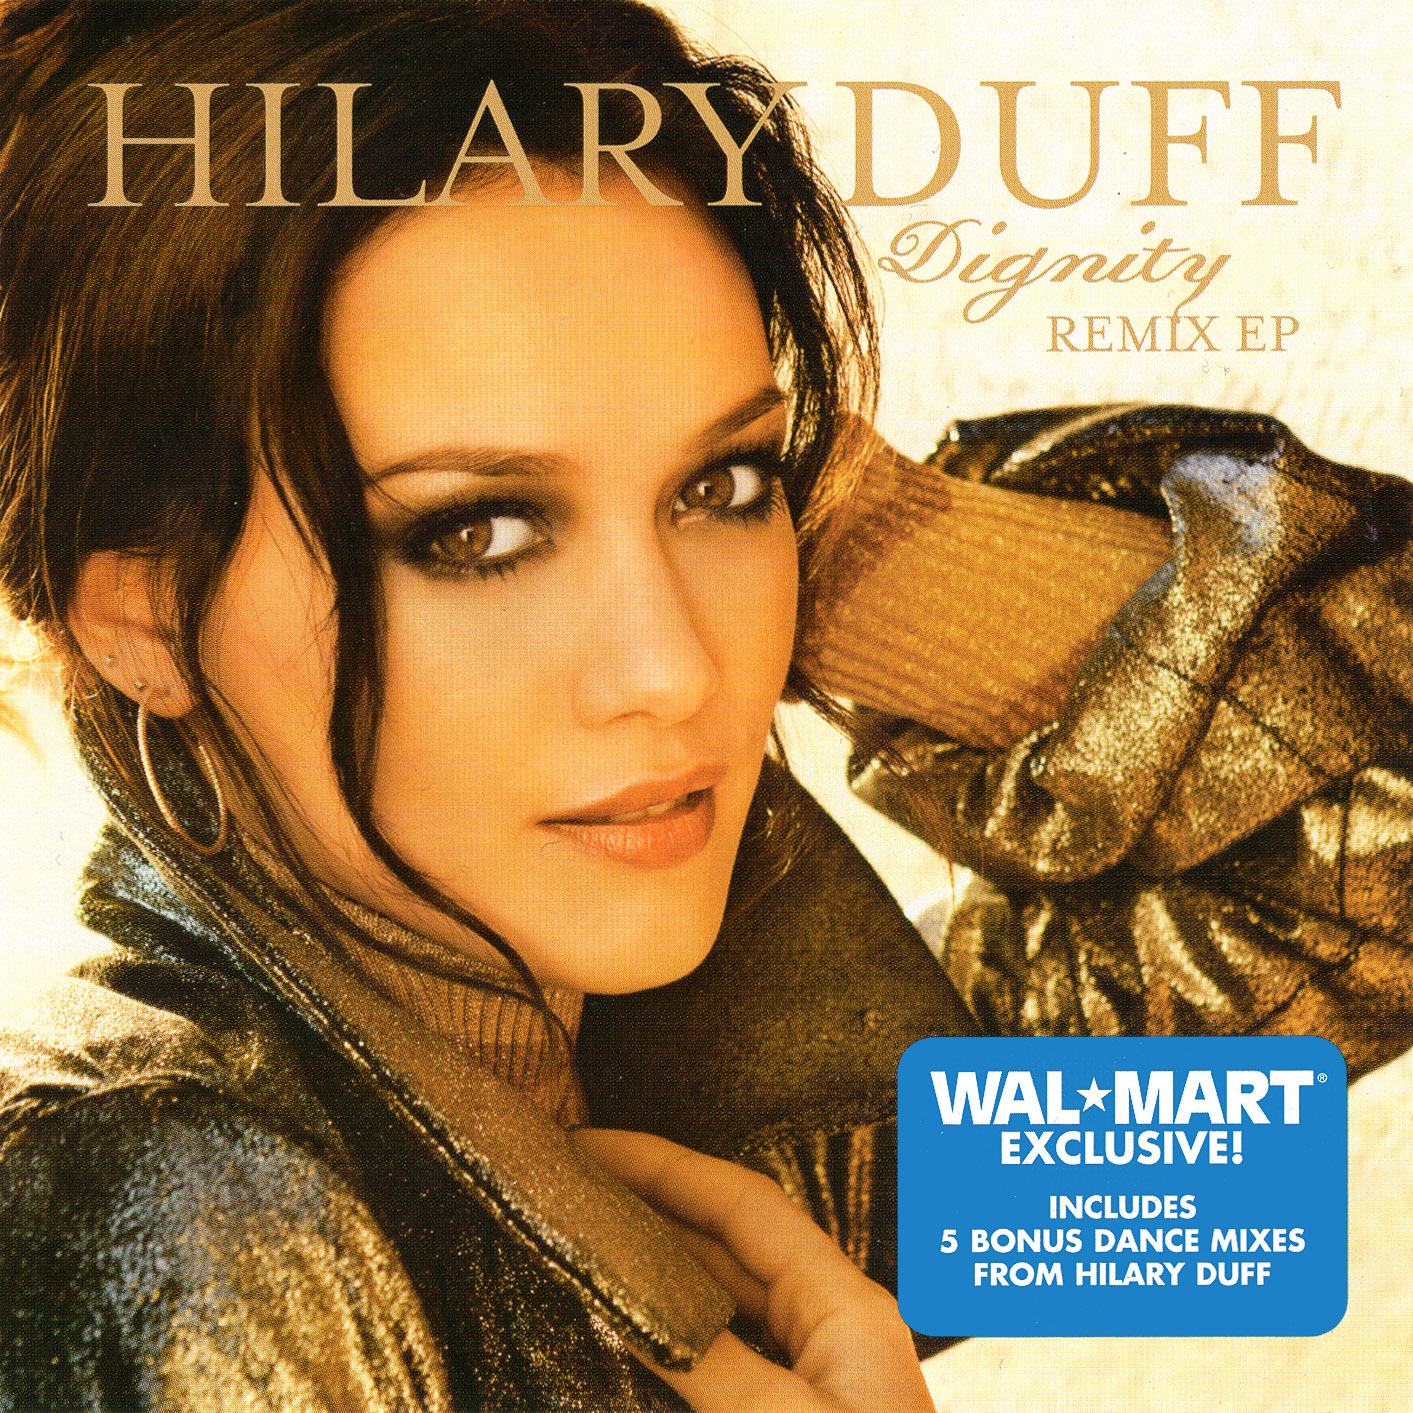 Hilary Duff Dignity Remix EP cover artwork